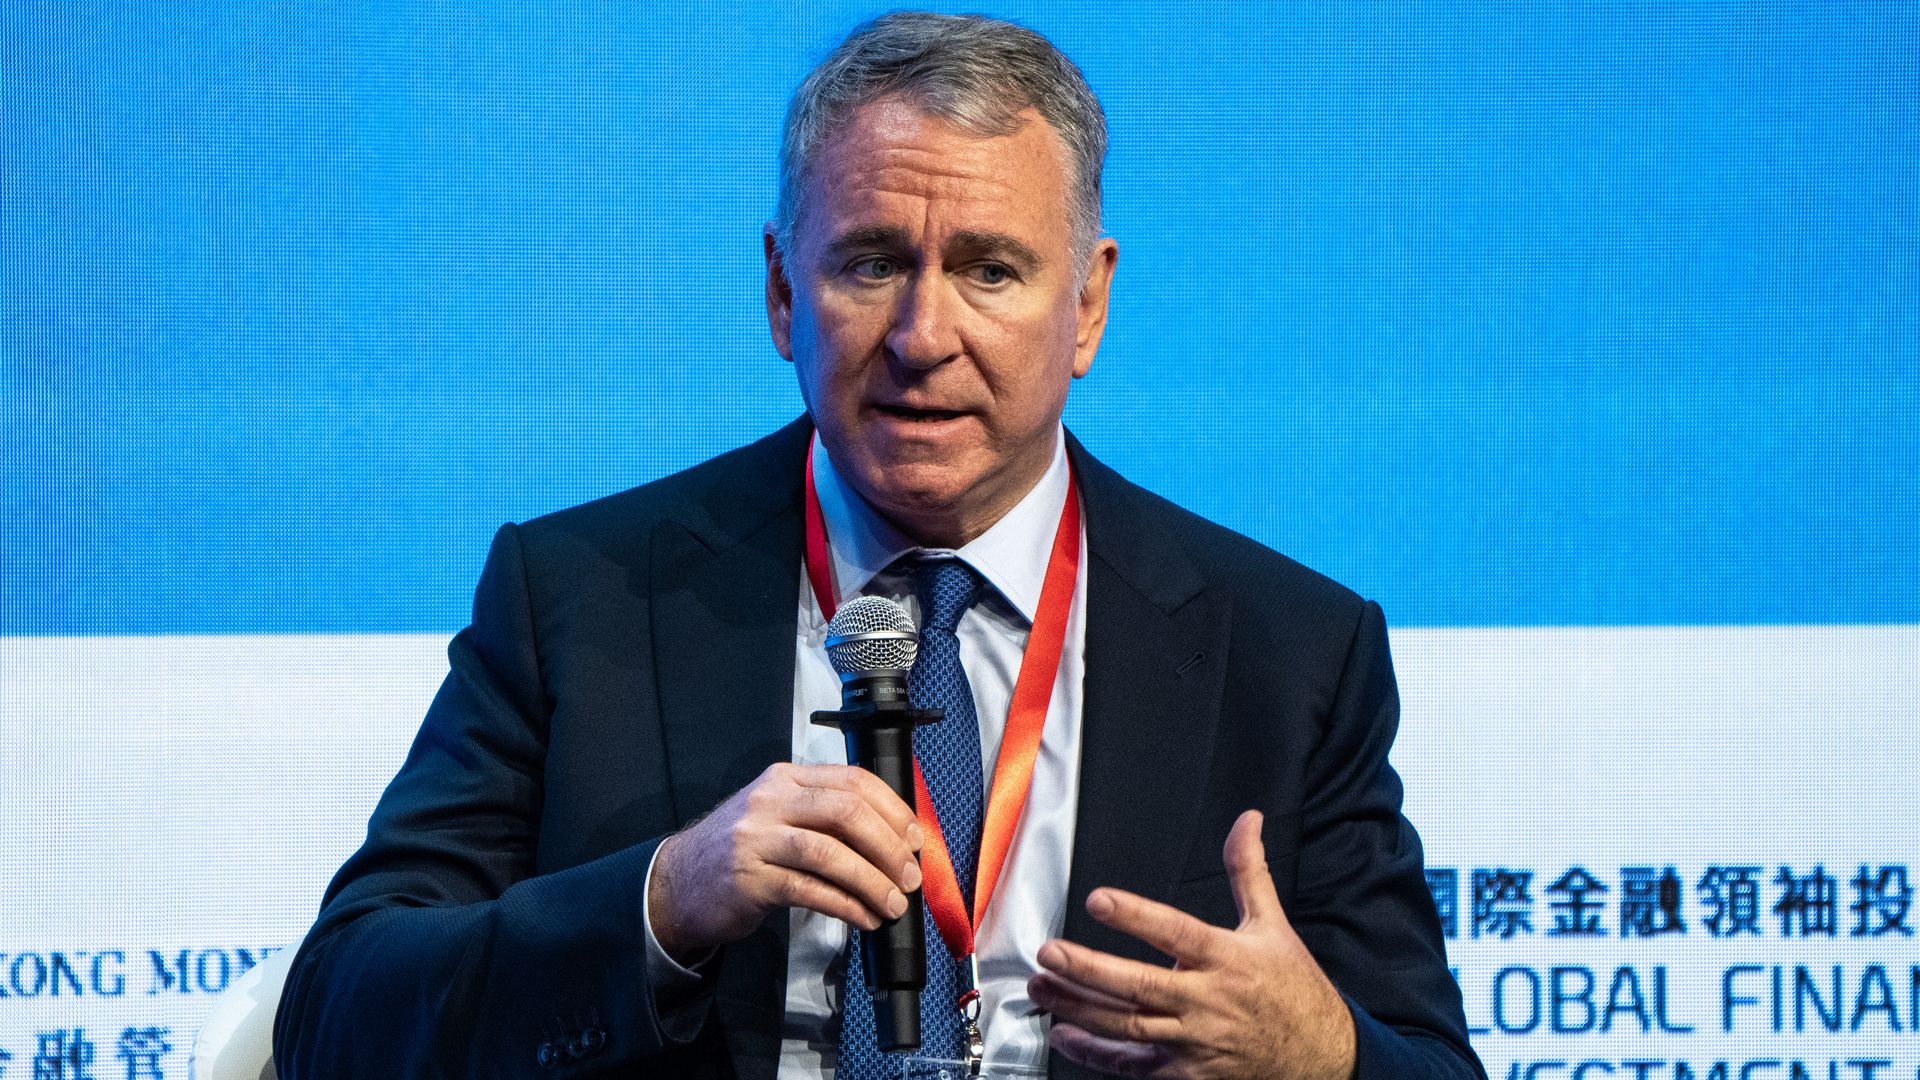 Ken Griffin holds microphone while speaking at a summit in Hong Kong